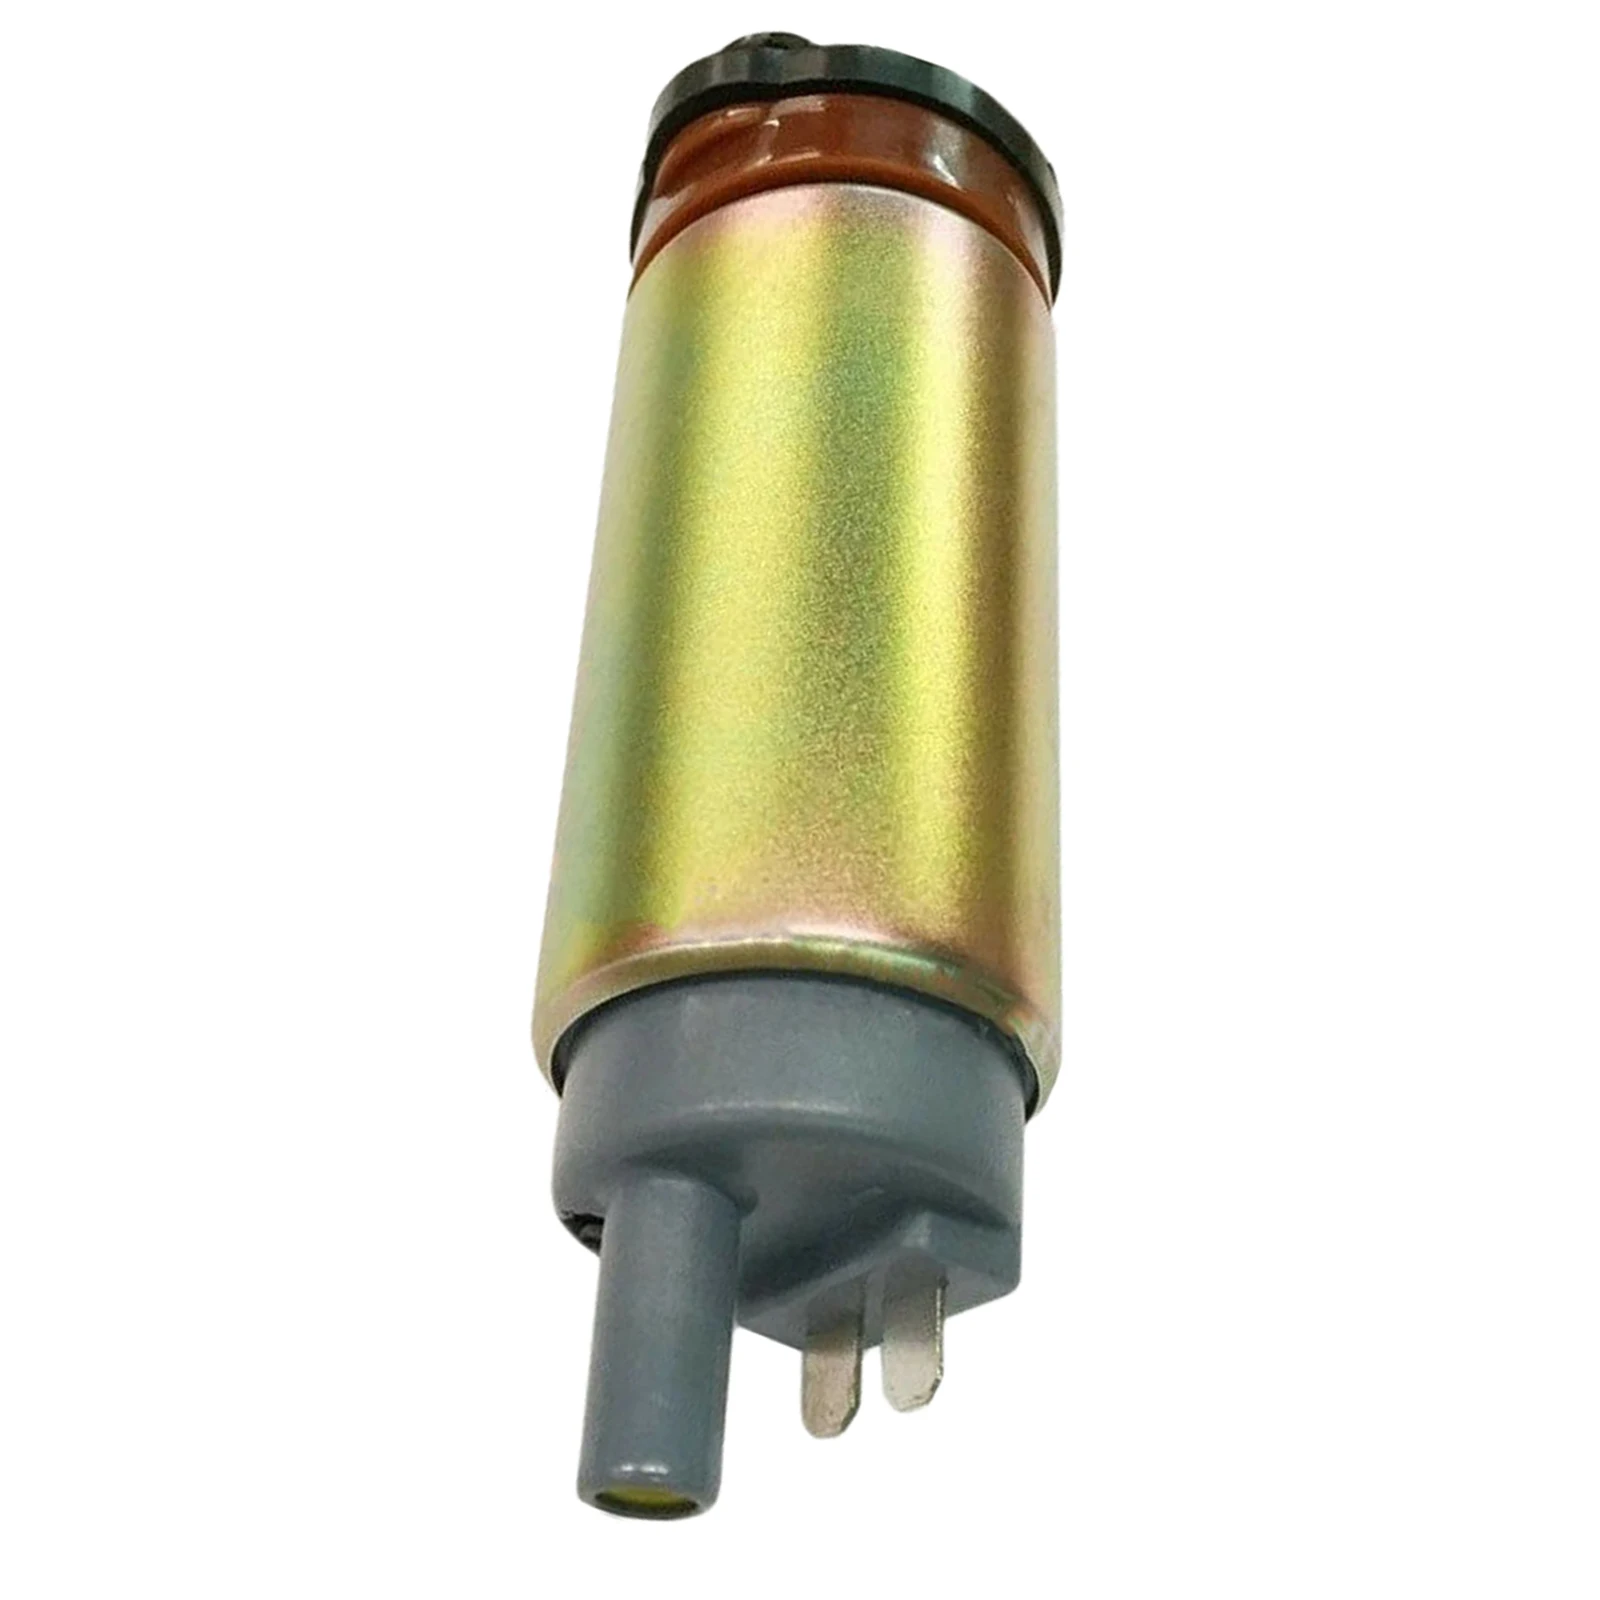 Fuel Pump Replaces892267A51 for 20-60 HP 4-Stroke Outboards Replacement Outboard Engine